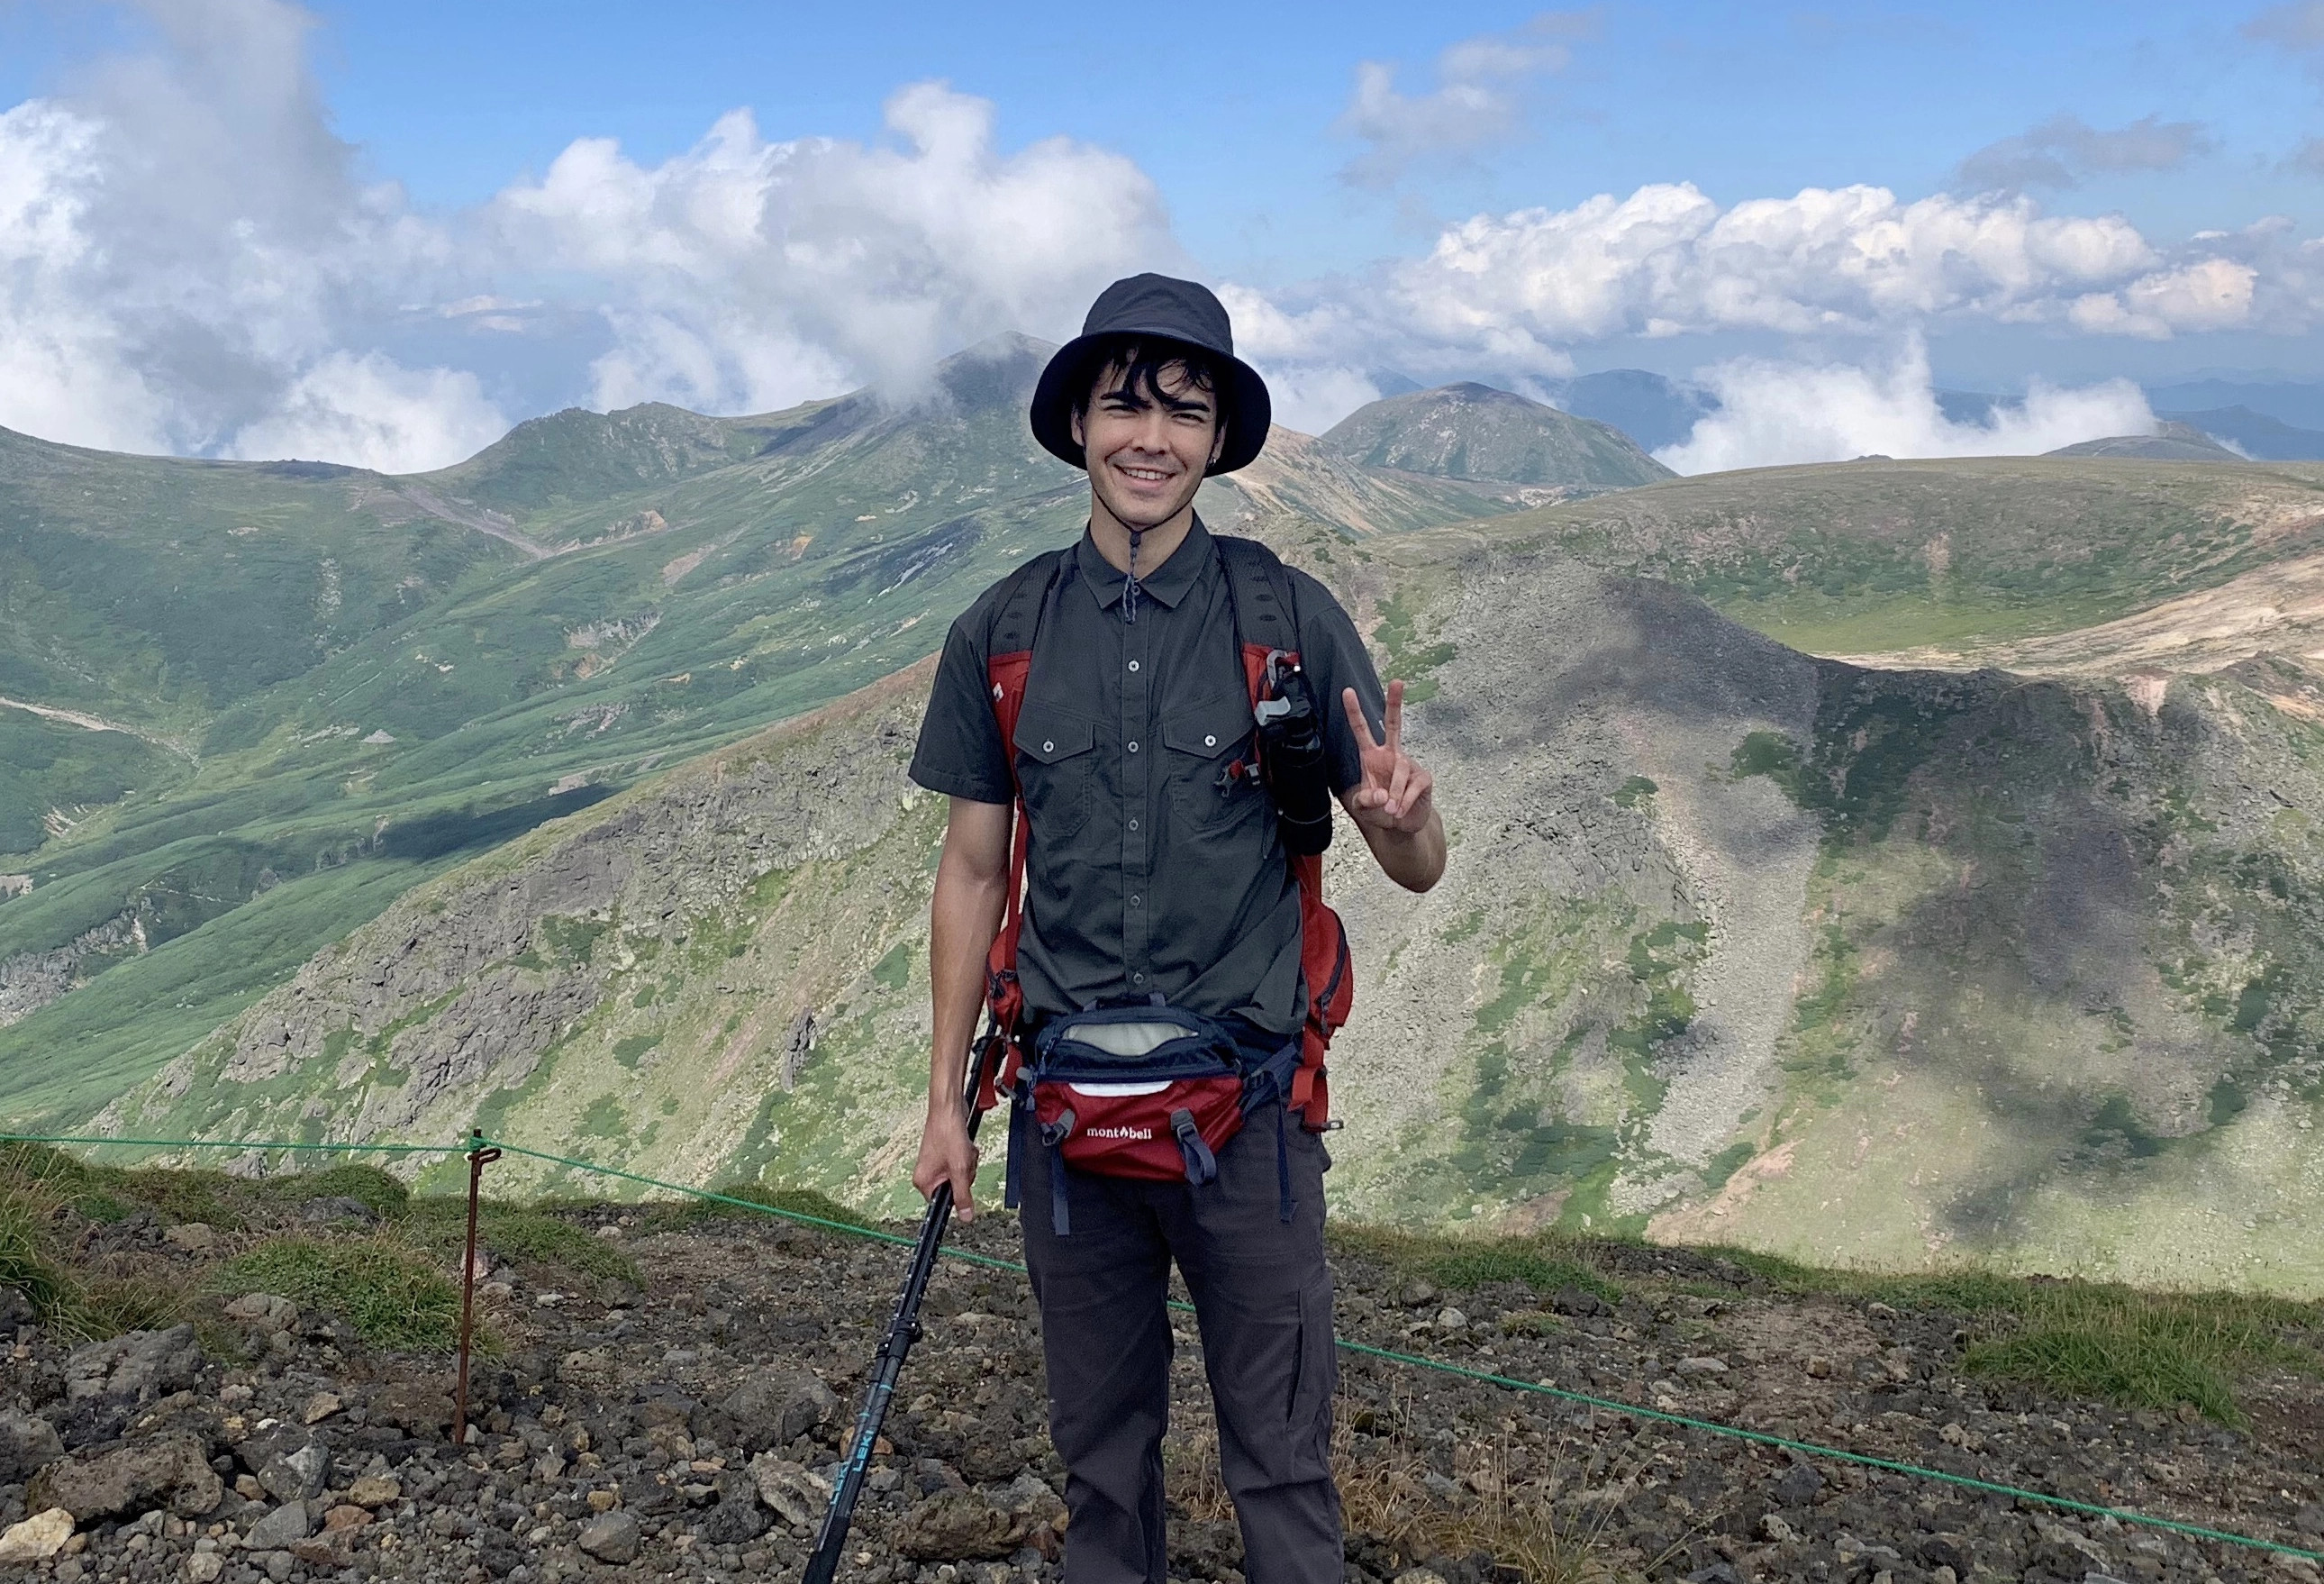 A hiker flashes a peace sign while posing on the slopes of Mt Asahidake. The Daisetsuzan mountains can be seen in the background.